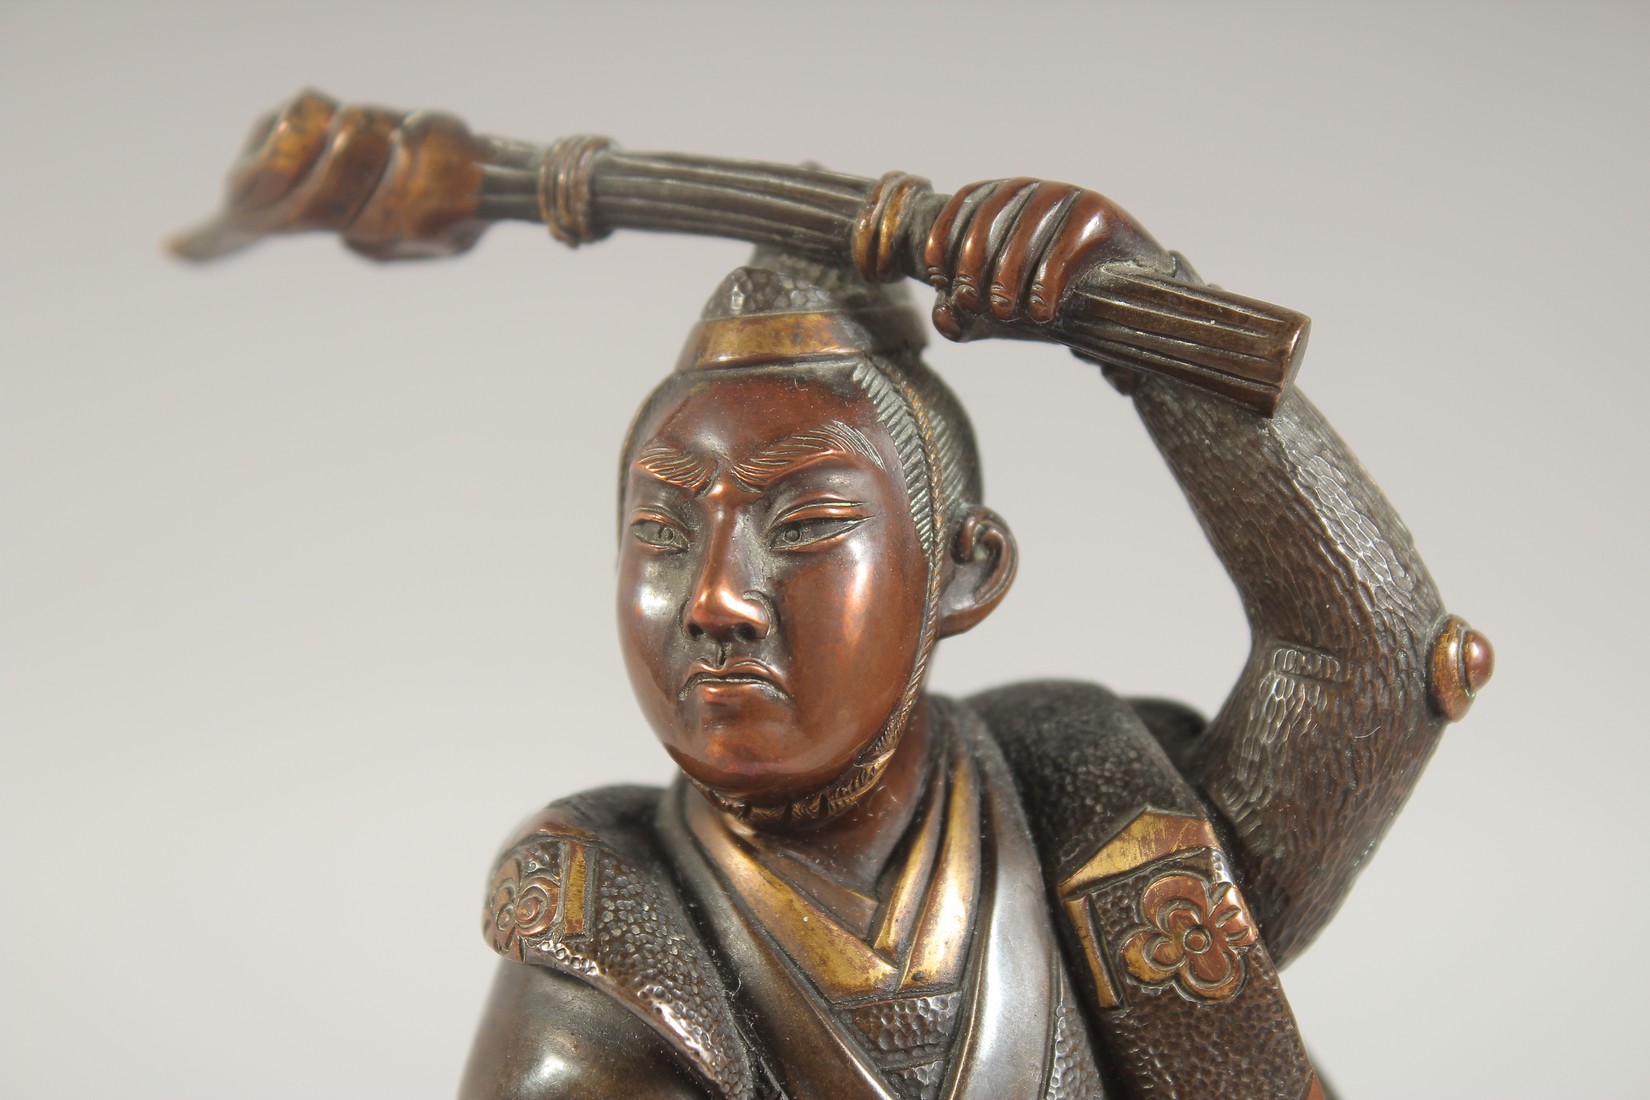 A FINE JAPANESE BRONZE OKIMONO of a warrior, signed Miyao Zo, mounted to a wooden base, 19.5cm - Image 6 of 6